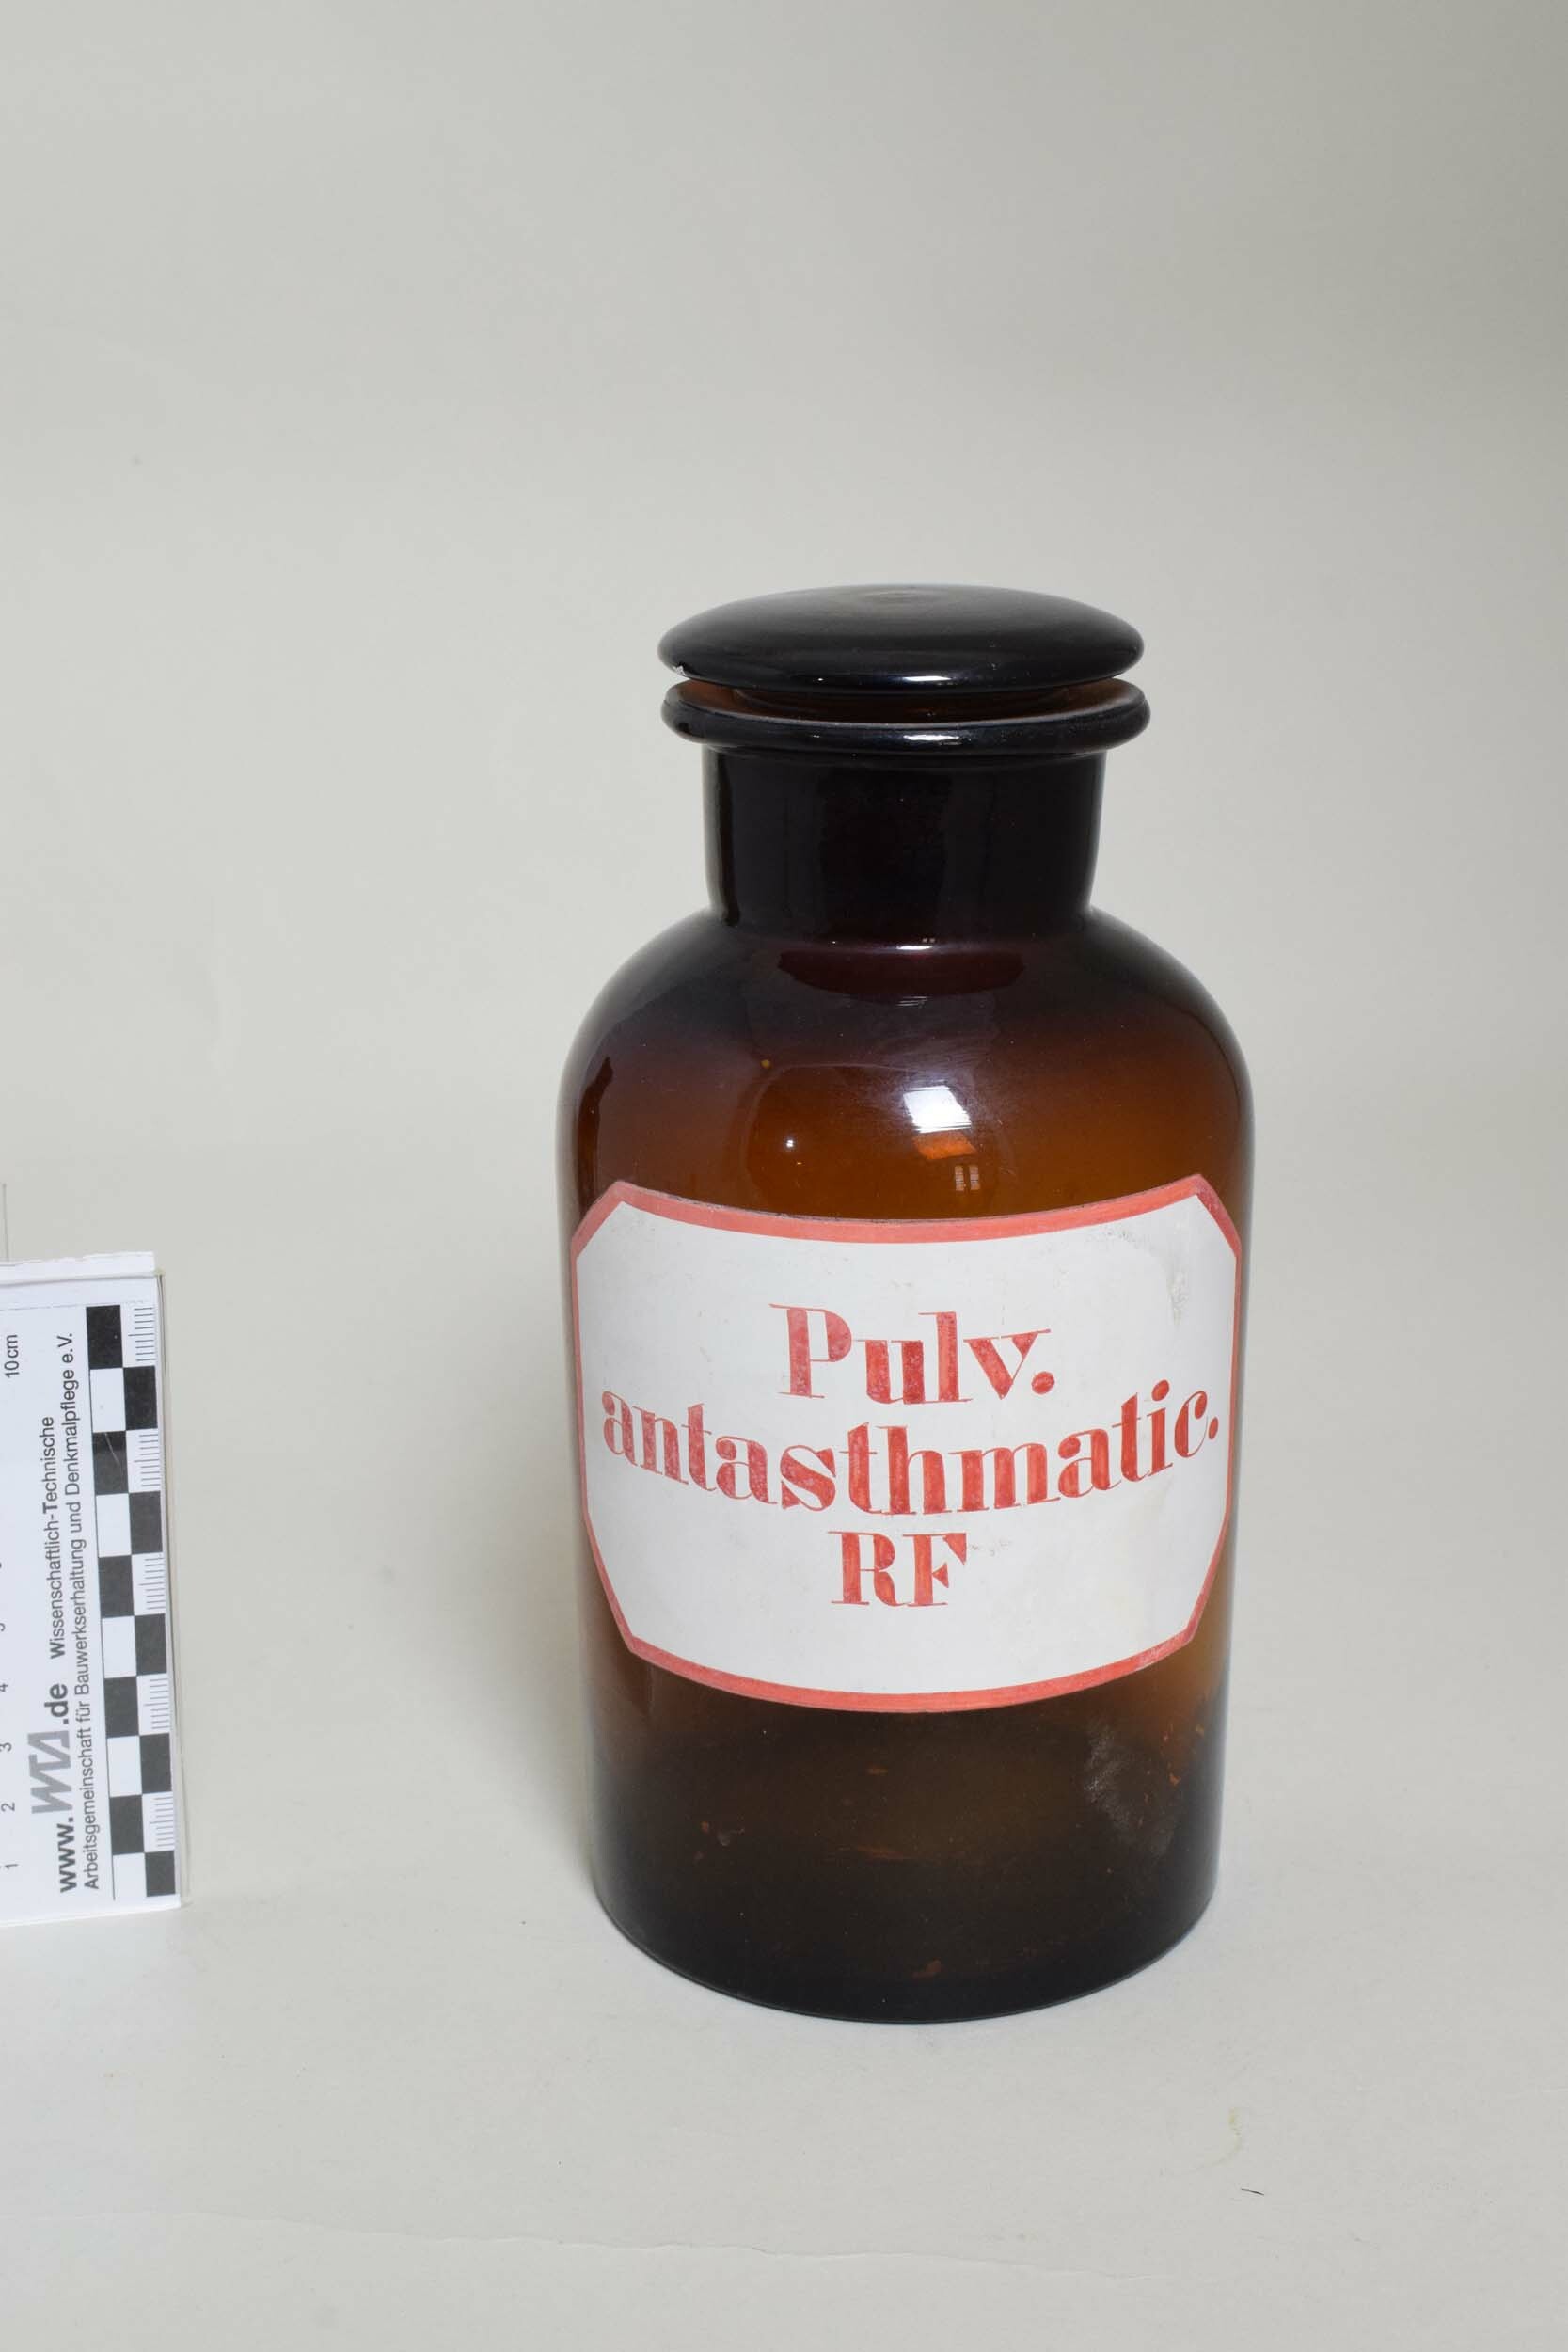 Apothekenflasche "Pulv.antasthmatic. RF" (Heimatmuseum Dohna CC BY-NC-SA)